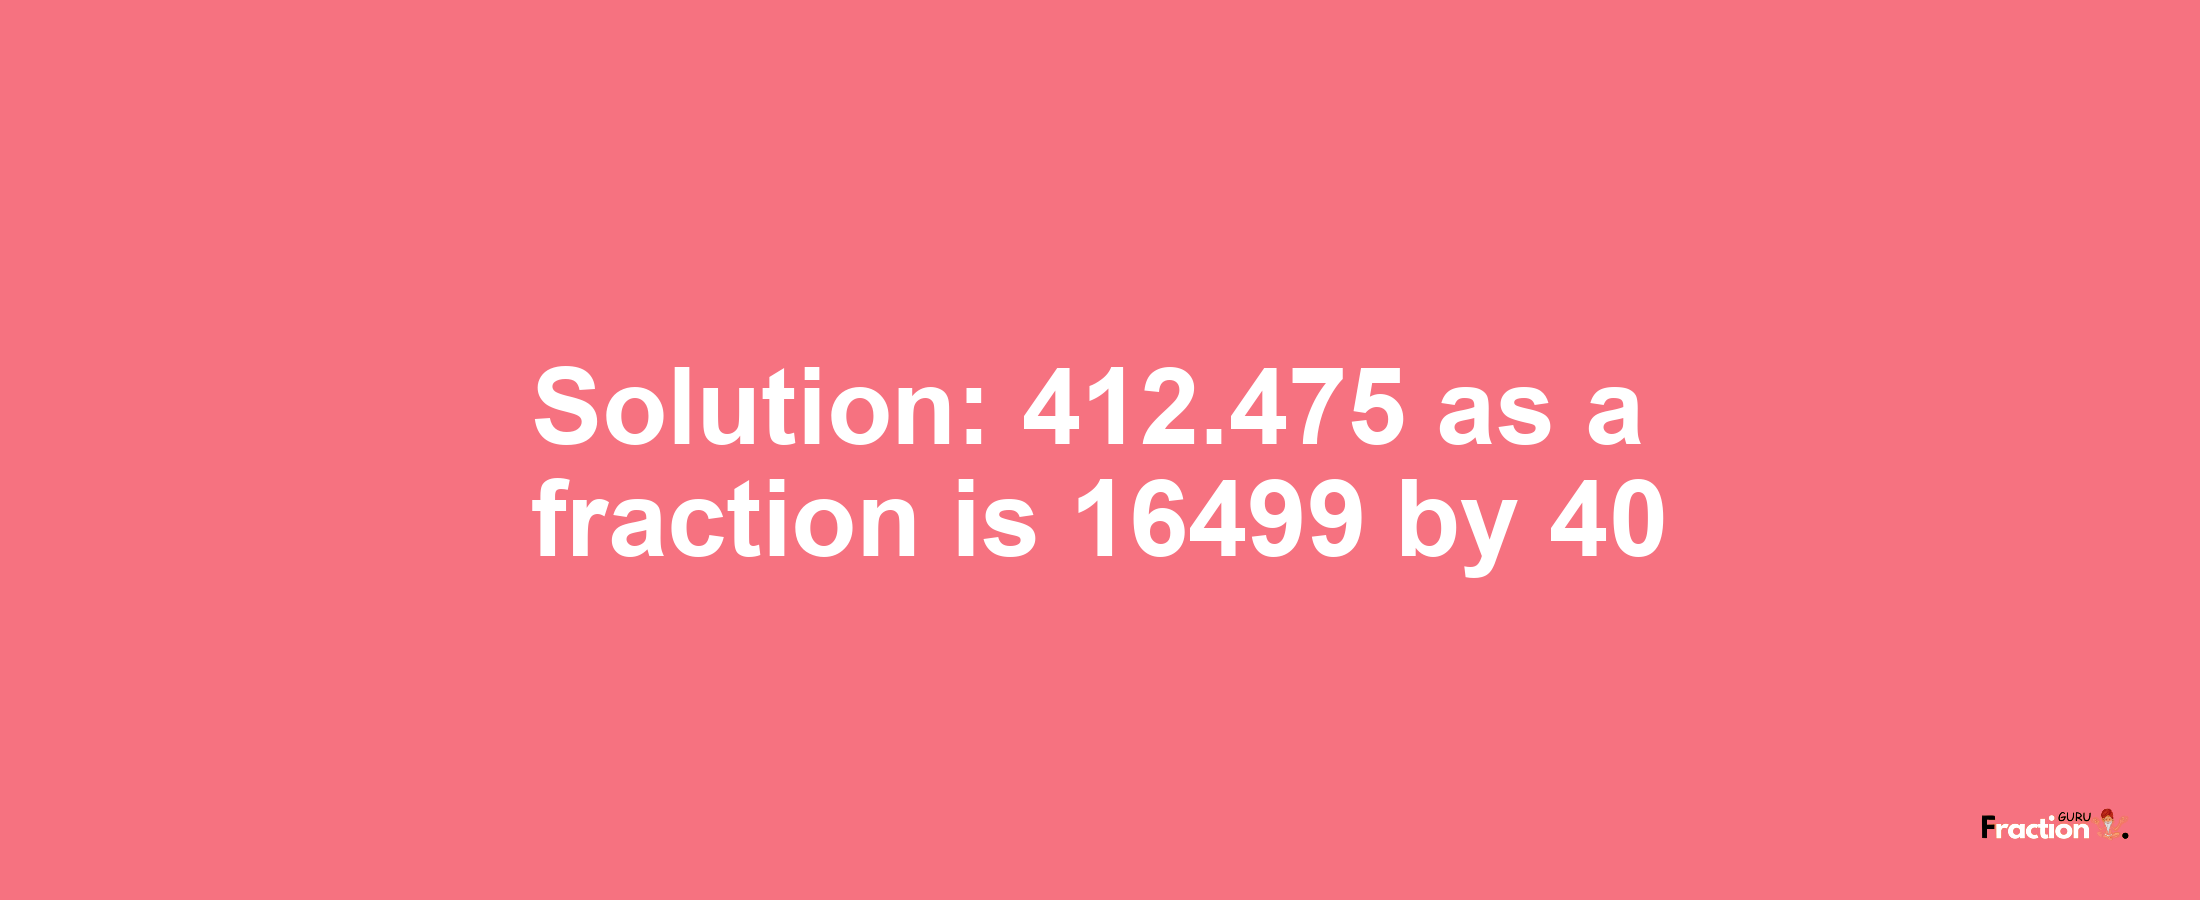 Solution:412.475 as a fraction is 16499/40